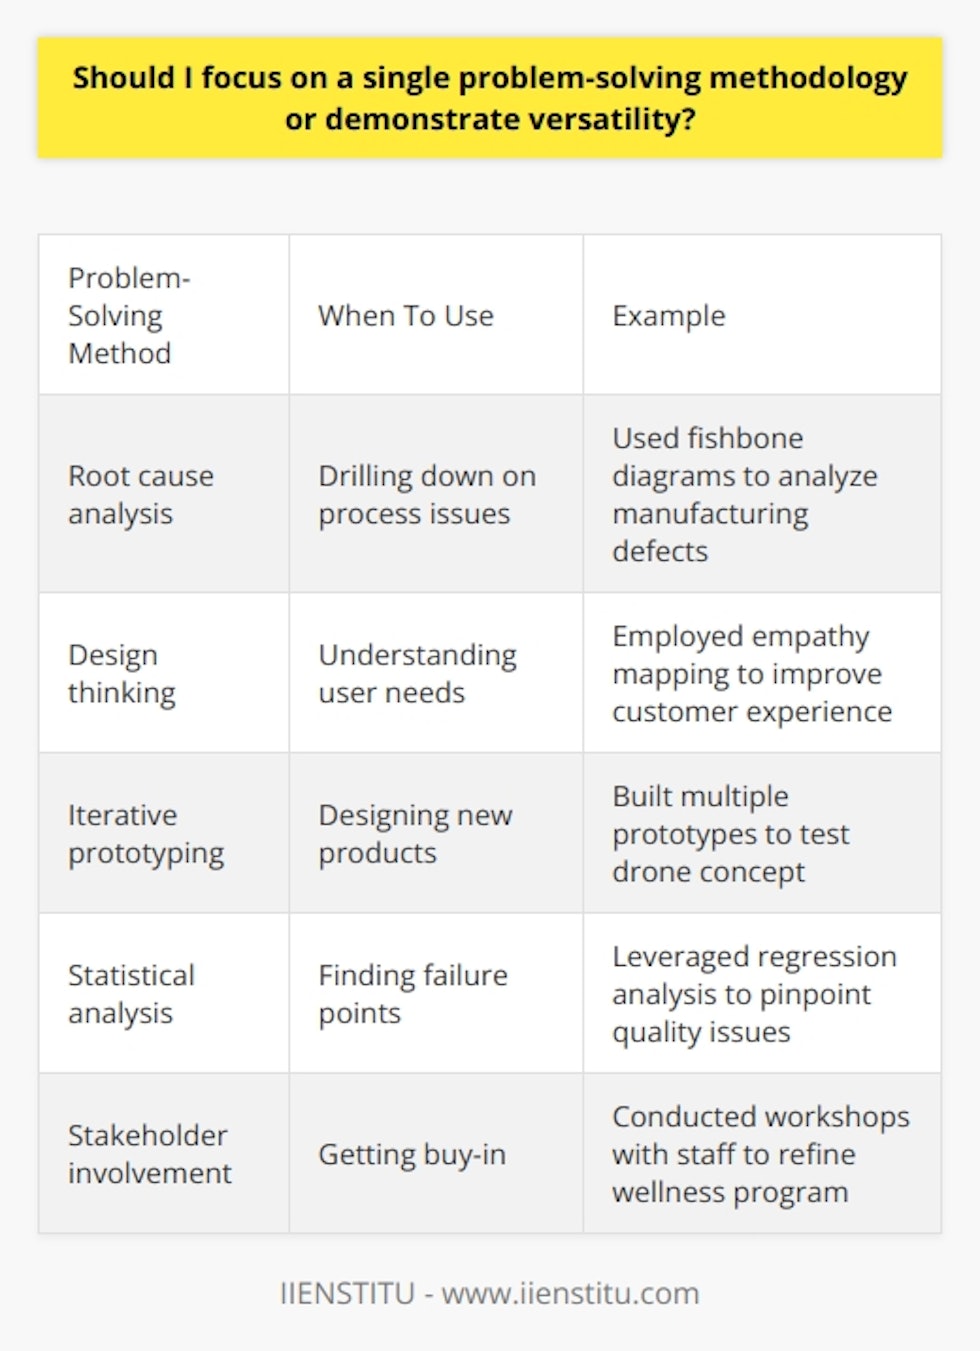 Here is some detailed content on demonstrating problem-solving versatility:When interviewing for jobs that involve analyzing problems and developing solutions, it is important to showcase your ability to draw upon different methodologies and adapt your approach based on the specific situation. While expertise in particular frameworks like Lean Six Sigma or Design Thinking is valuable, employers often look for versatility over rigid adherence to one problem-solving style. Demonstrate your versatility by giving examples of how you have successfully employed different techniques. For instance, you may have used root cause analysis and fishbone diagrams to drill down on process issues in one project, while taking an empathetic design thinking approach to understand user needs in another context. Highlight how you determine what type of problem-solving method is appropriate based on factors like the goals, stakeholders, and constraints involved. Explain how you have a “toolbox” of different problem-solving techniques, but choose based on the unique aspects and challenges of each project. For example, you may use iterative prototyping when designing a new product, but leverage statistical analysis when looking for failure points in a manufacturing process. Convey your ability to gather the right data, involve various stakeholders, and continually verify your solutions along the way. Illustrate your adaptability by giving examples across different industries and project types. Vary the kinds of problems you have encountered and methods used to emphasize your versatility. At the same time, show how you have developed deeper expertise in certain techniques without becoming rigid or formulaic in applying them. Demonstrate curiosity for continuously expanding your problem-solving toolkit over the course of your career.